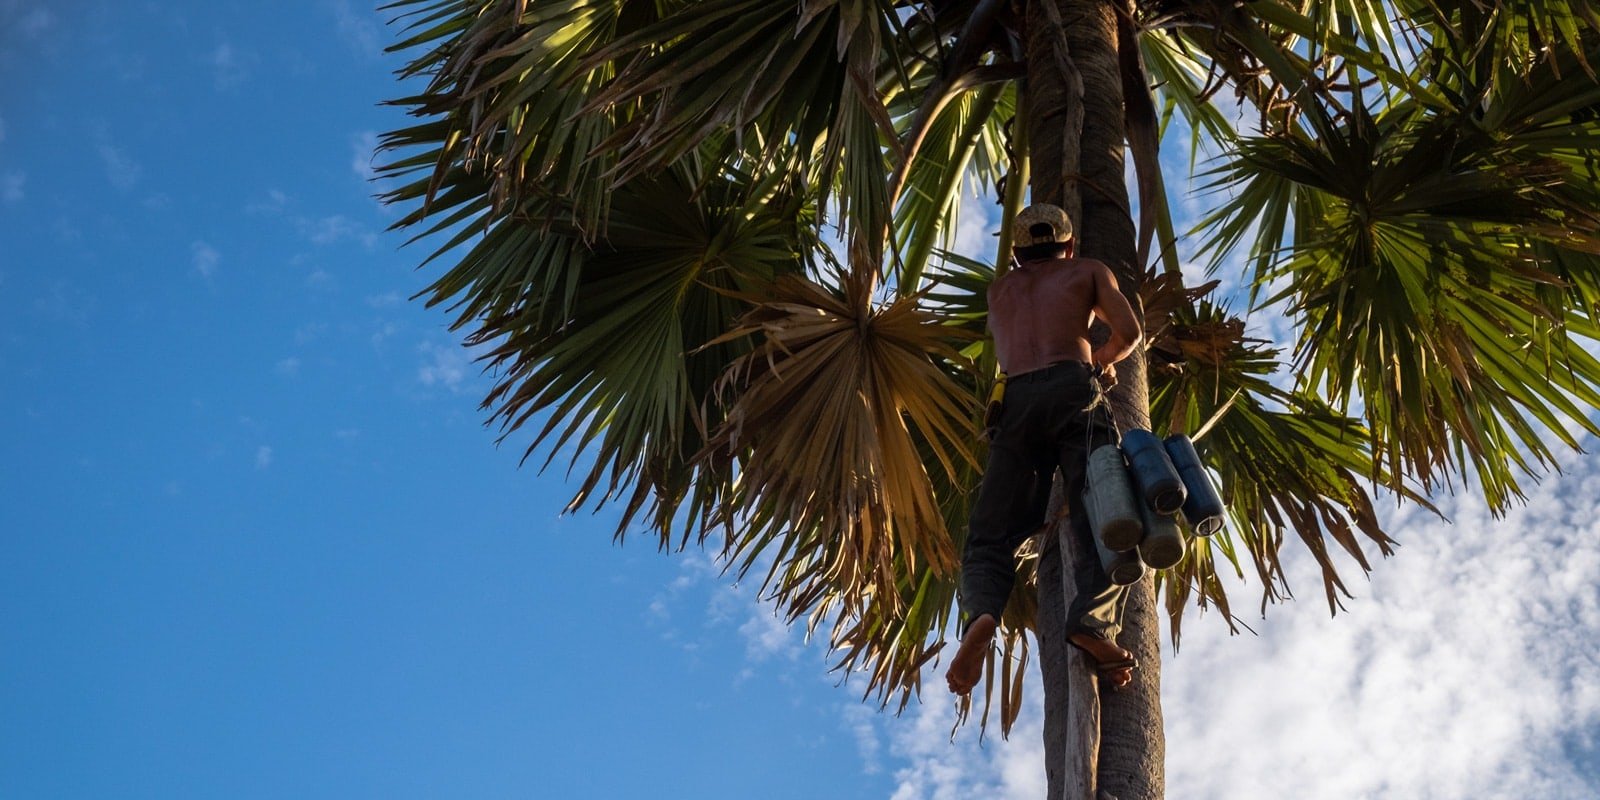 How palm sugar is made. Khmer farmer climbs to the top of a palm tree to attach the tubes to collect the sap from the flower to make palm sugar eventually.